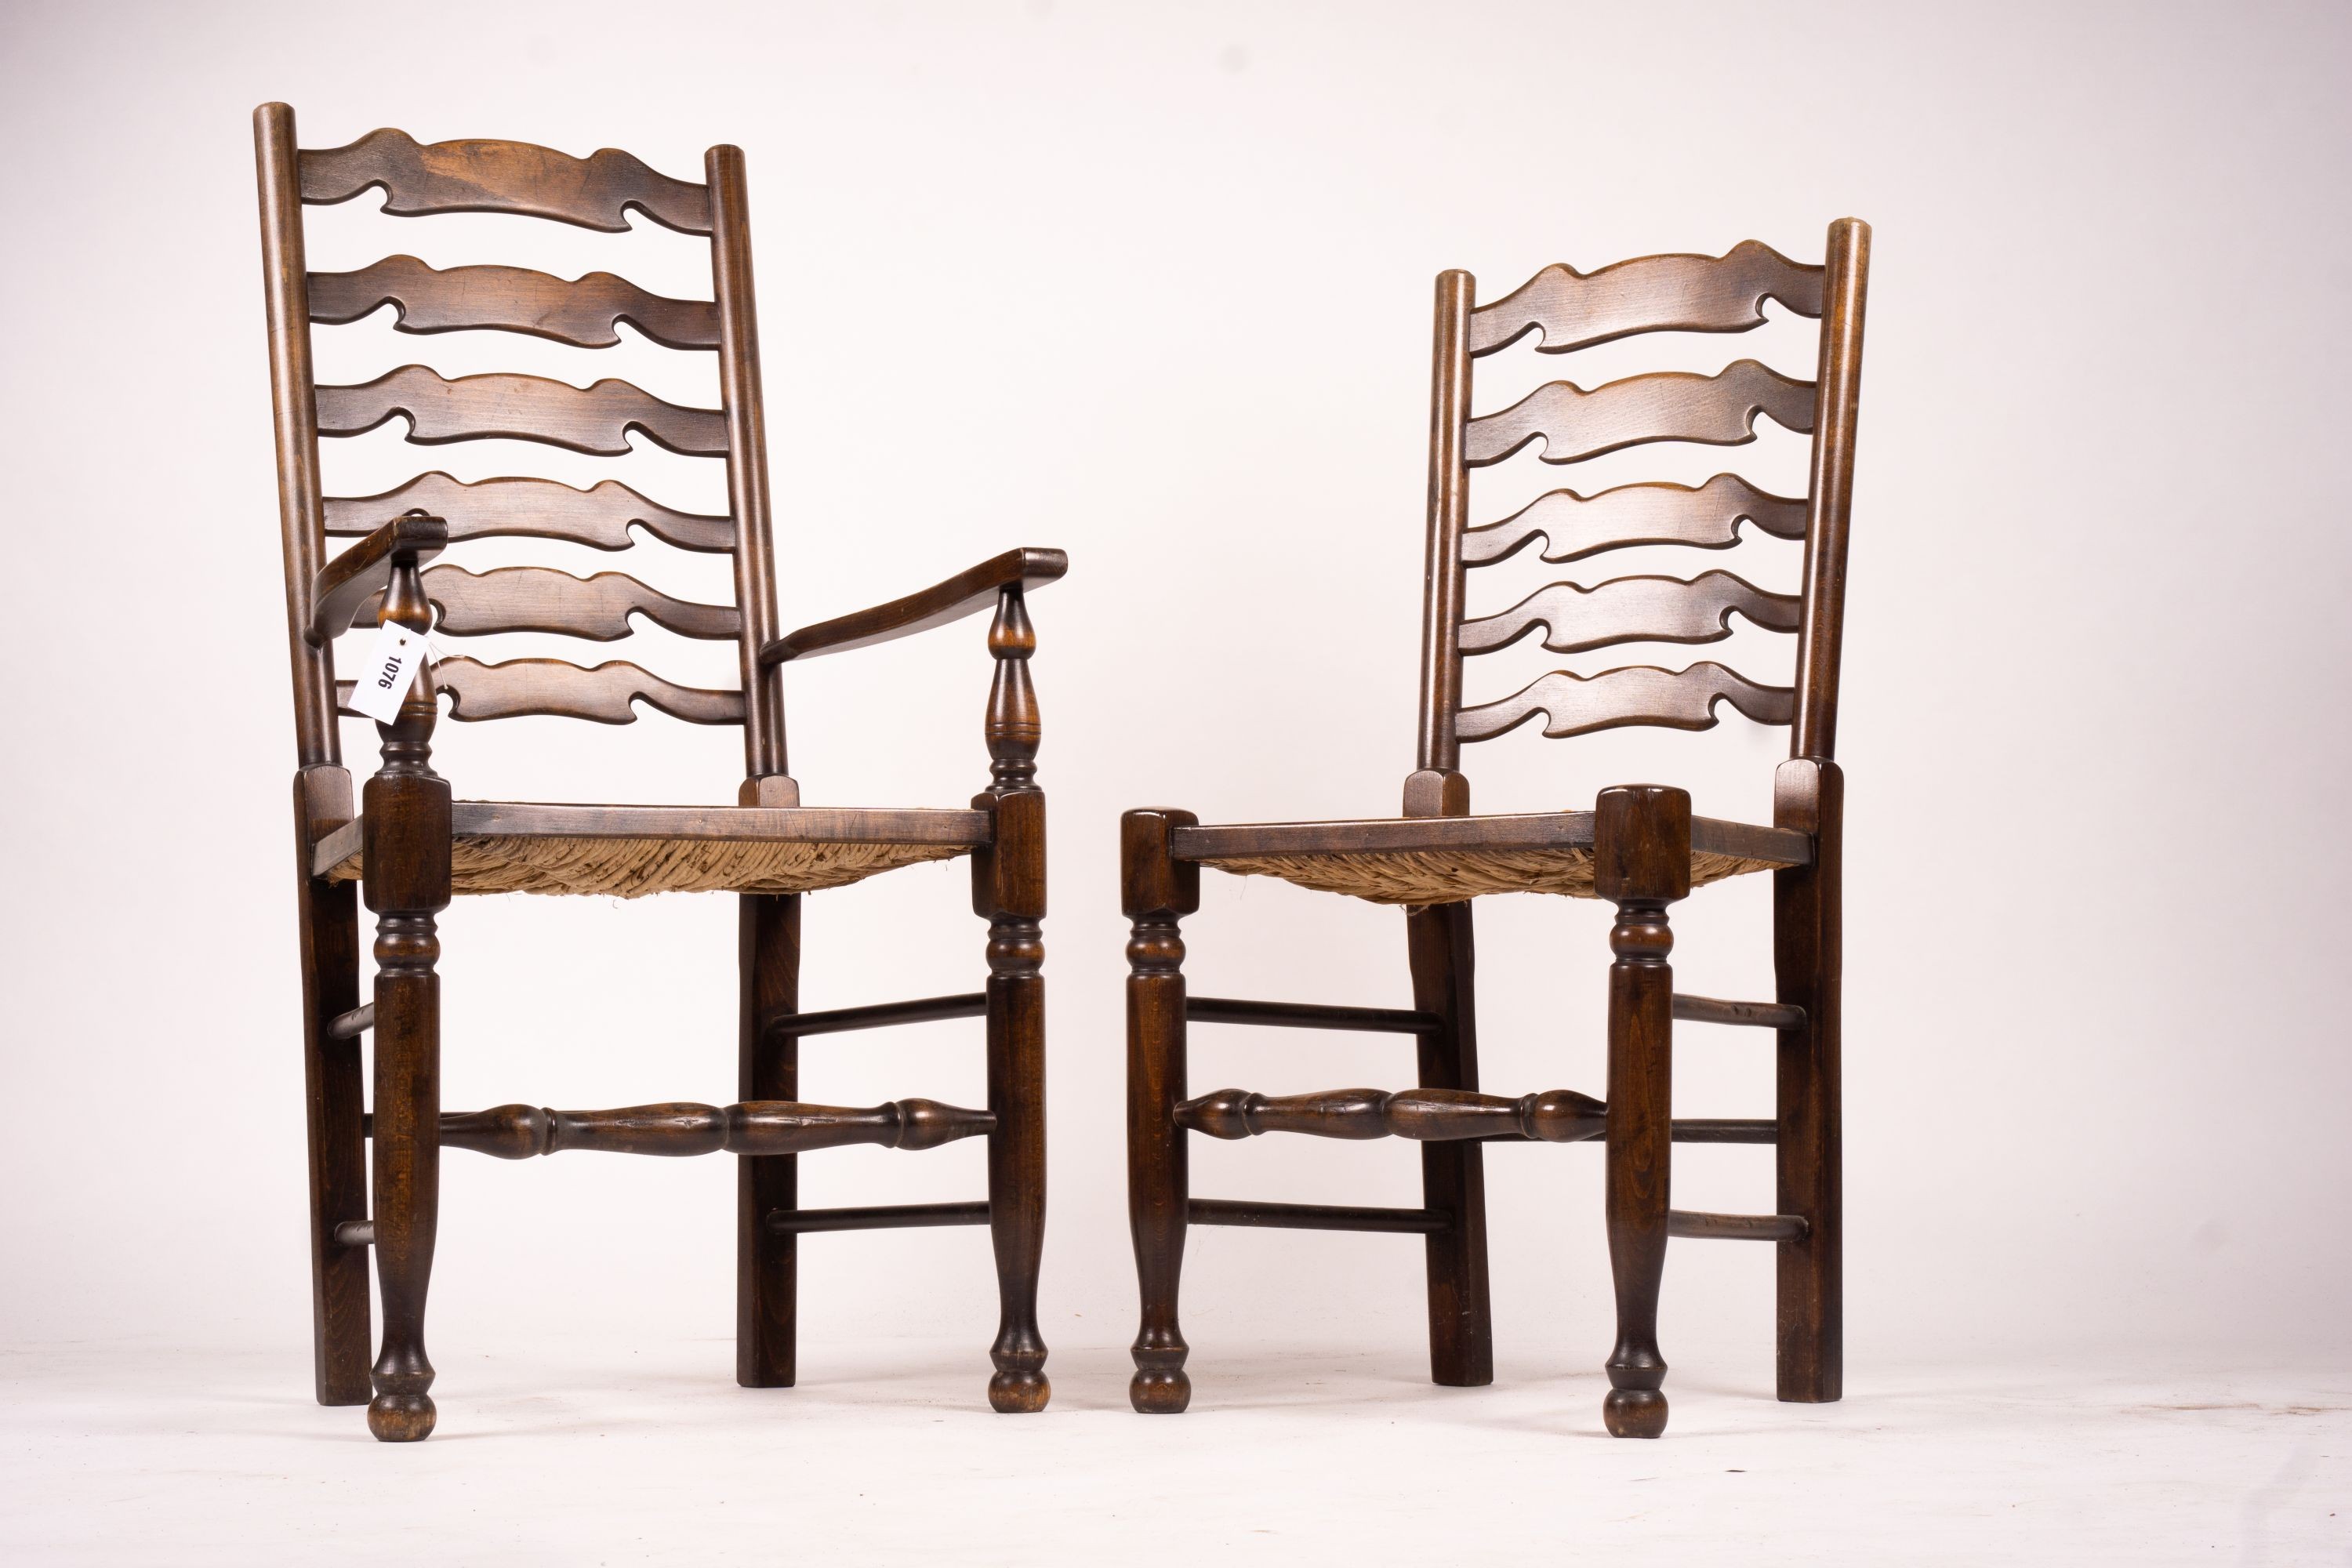 A set of ten 18th century style beech ladderback rush seat dining chairs, two with arms